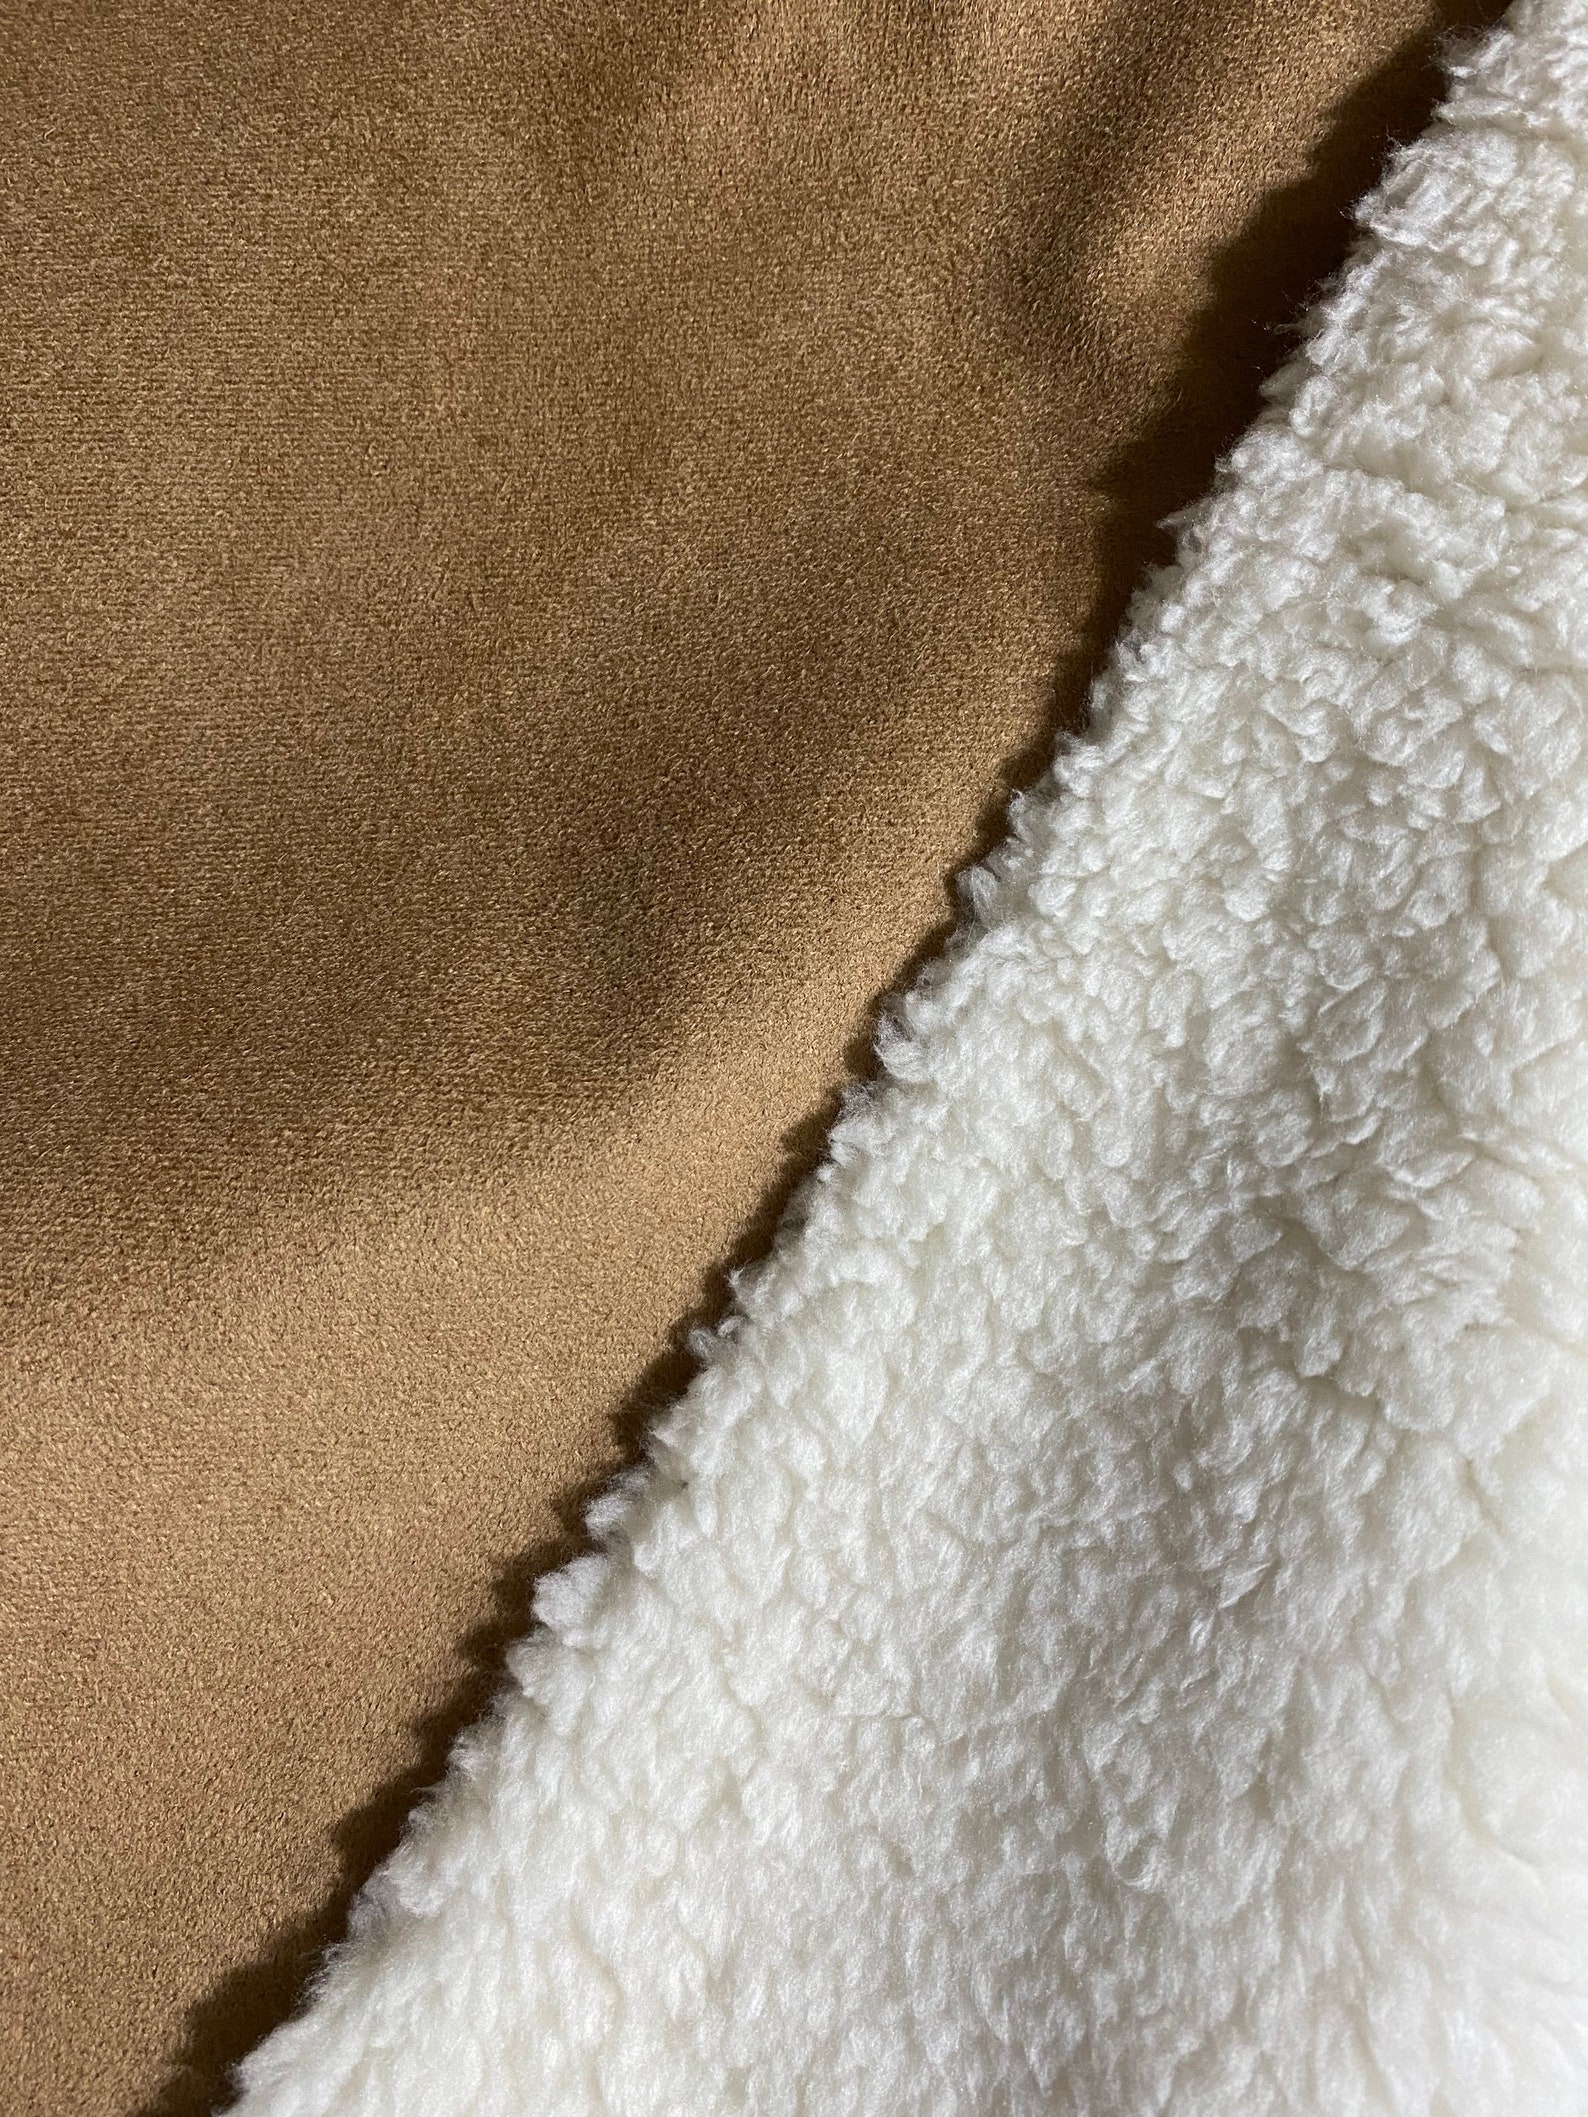 One Half Yard of Suede Sherpa Fabric Ivory Sherpa Brown | Etsy